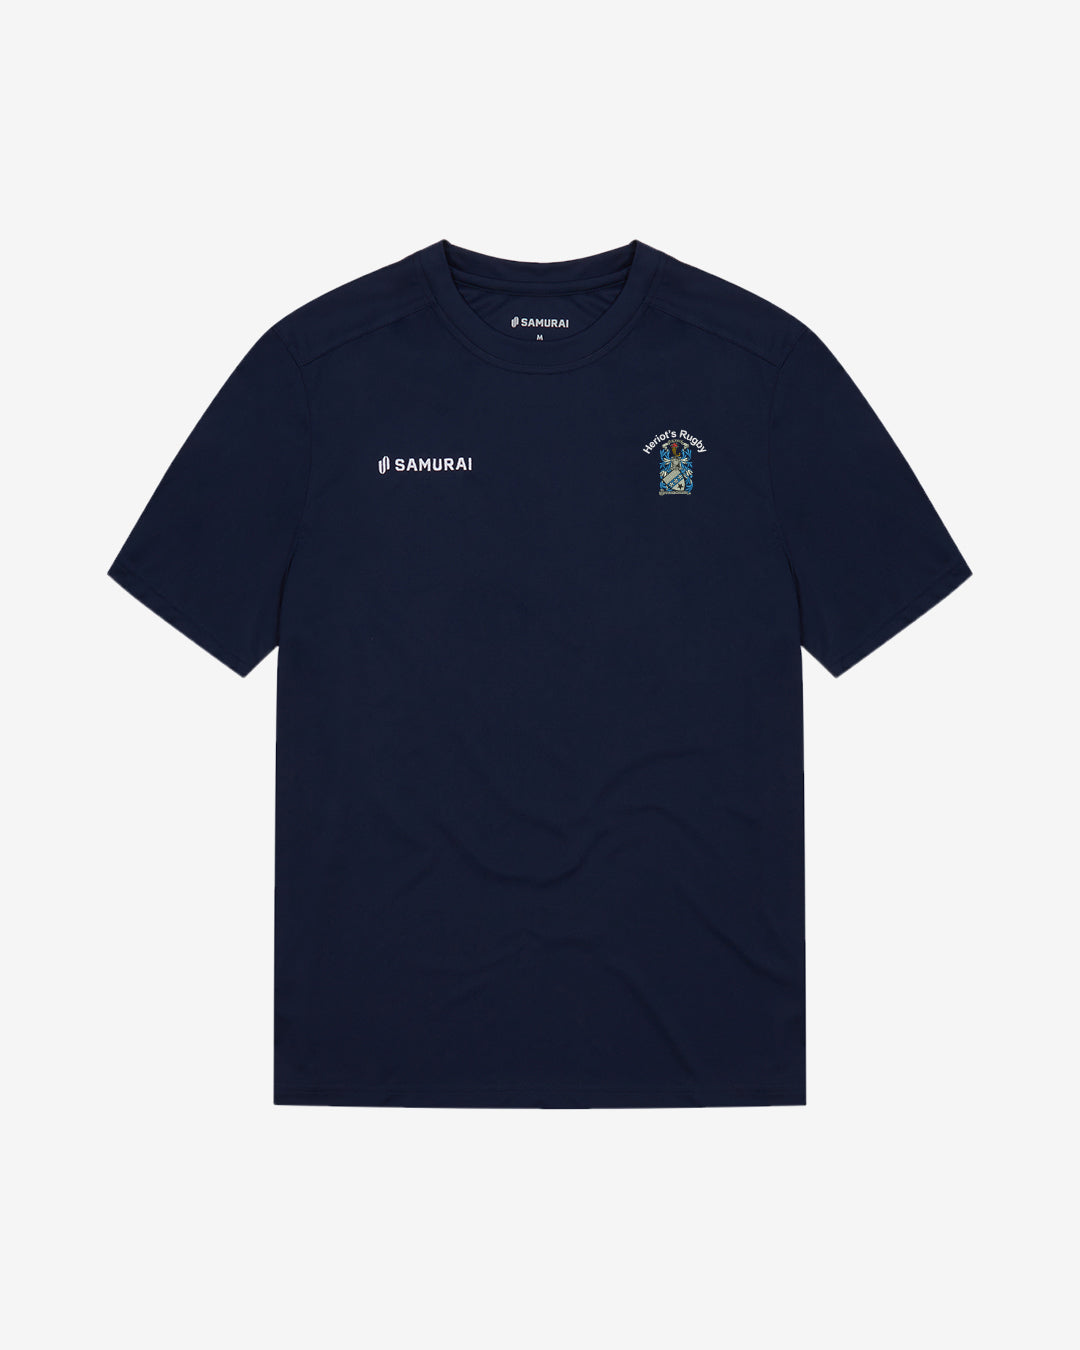 Heriot's Rugby Club - EP:0110 - Performance Tee 2.1 - Navy